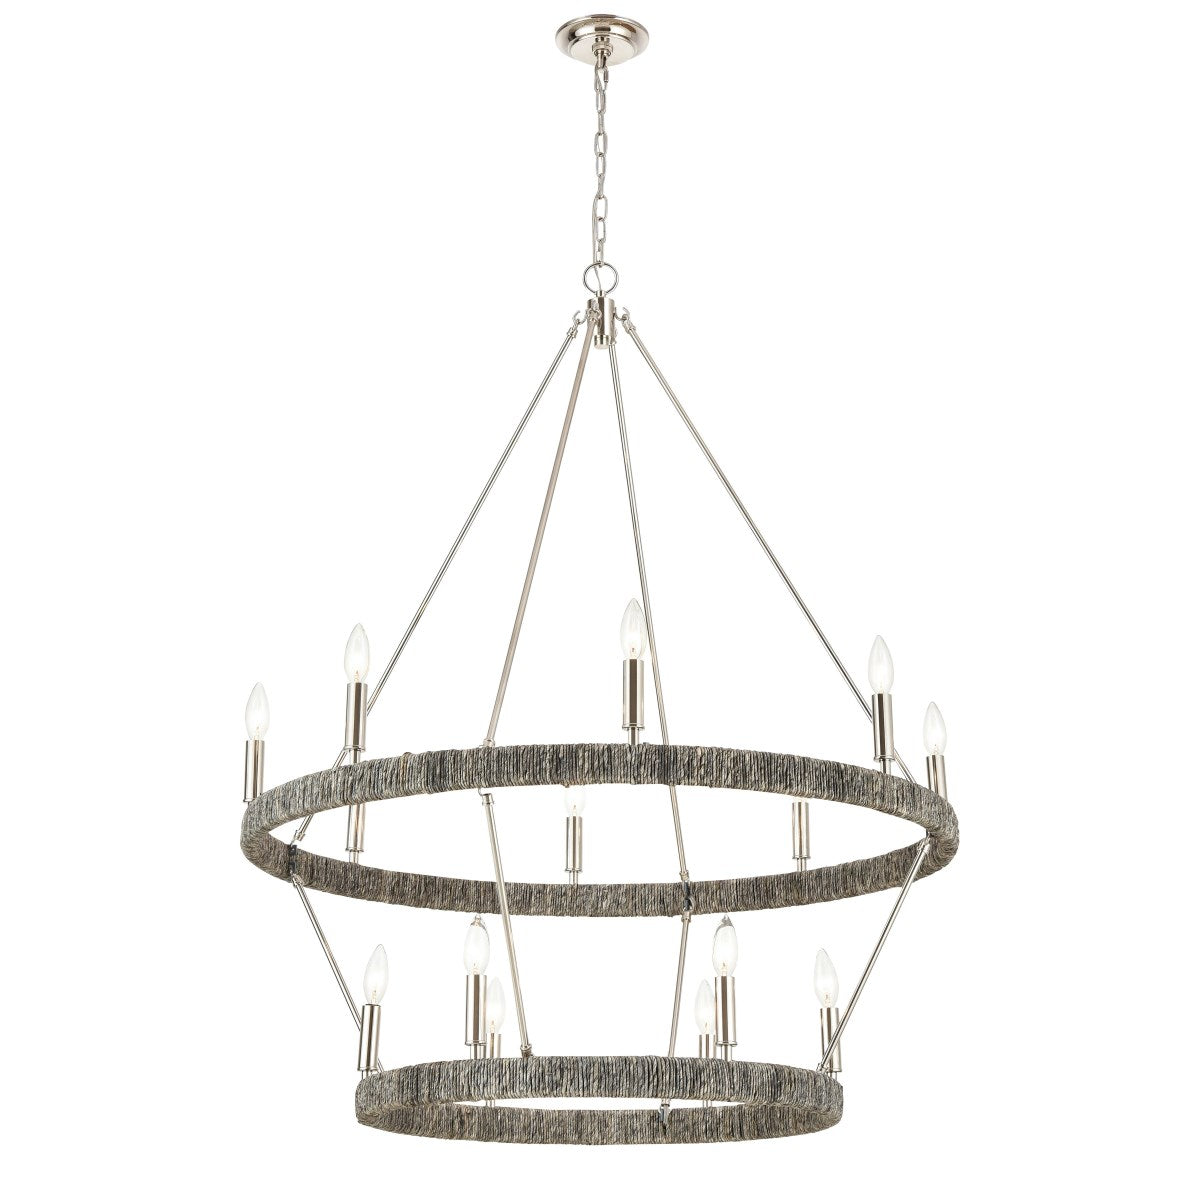 ABACA 36'' WIDE 14-LIGHT CHANDELIER - FREE SHIPPING !!!